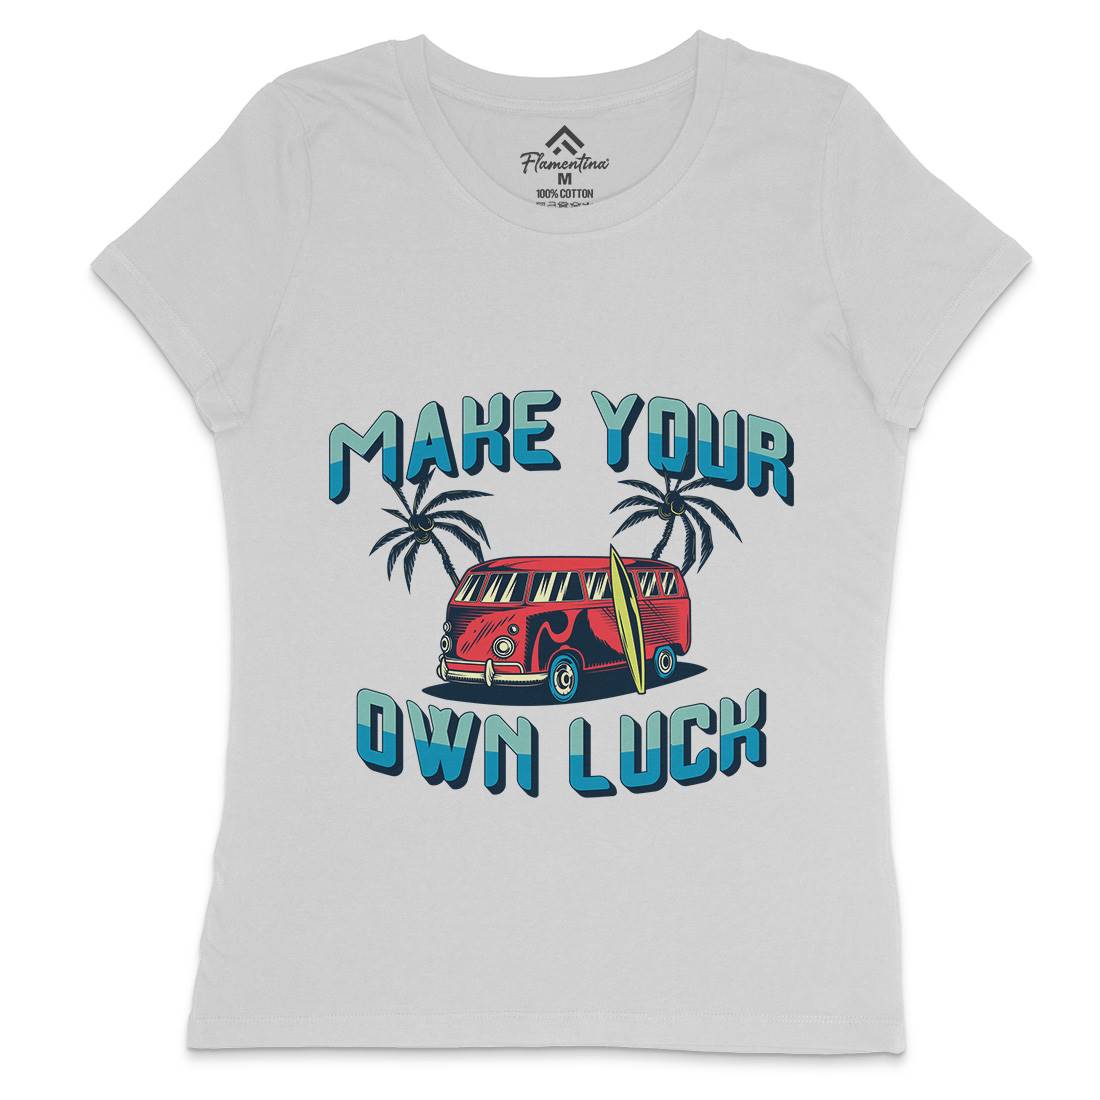 Make Your Own Luck Womens Crew Neck T-Shirt Nature B307